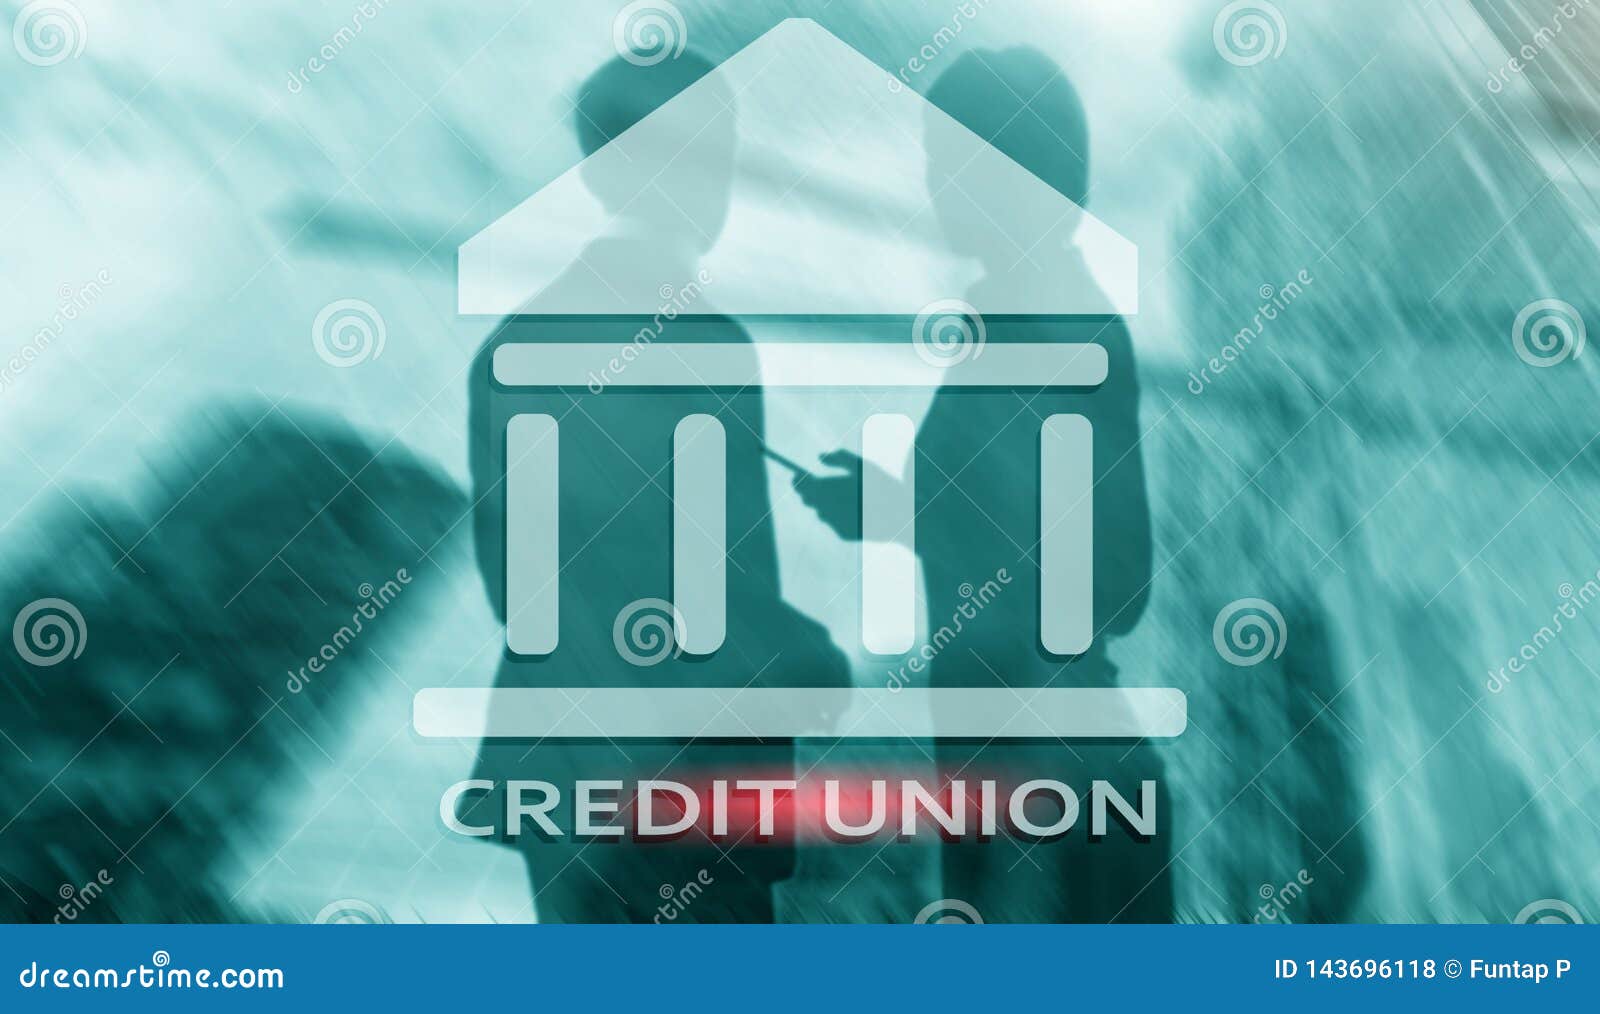 credit union. financial cooperative banking services. finance abstract background.